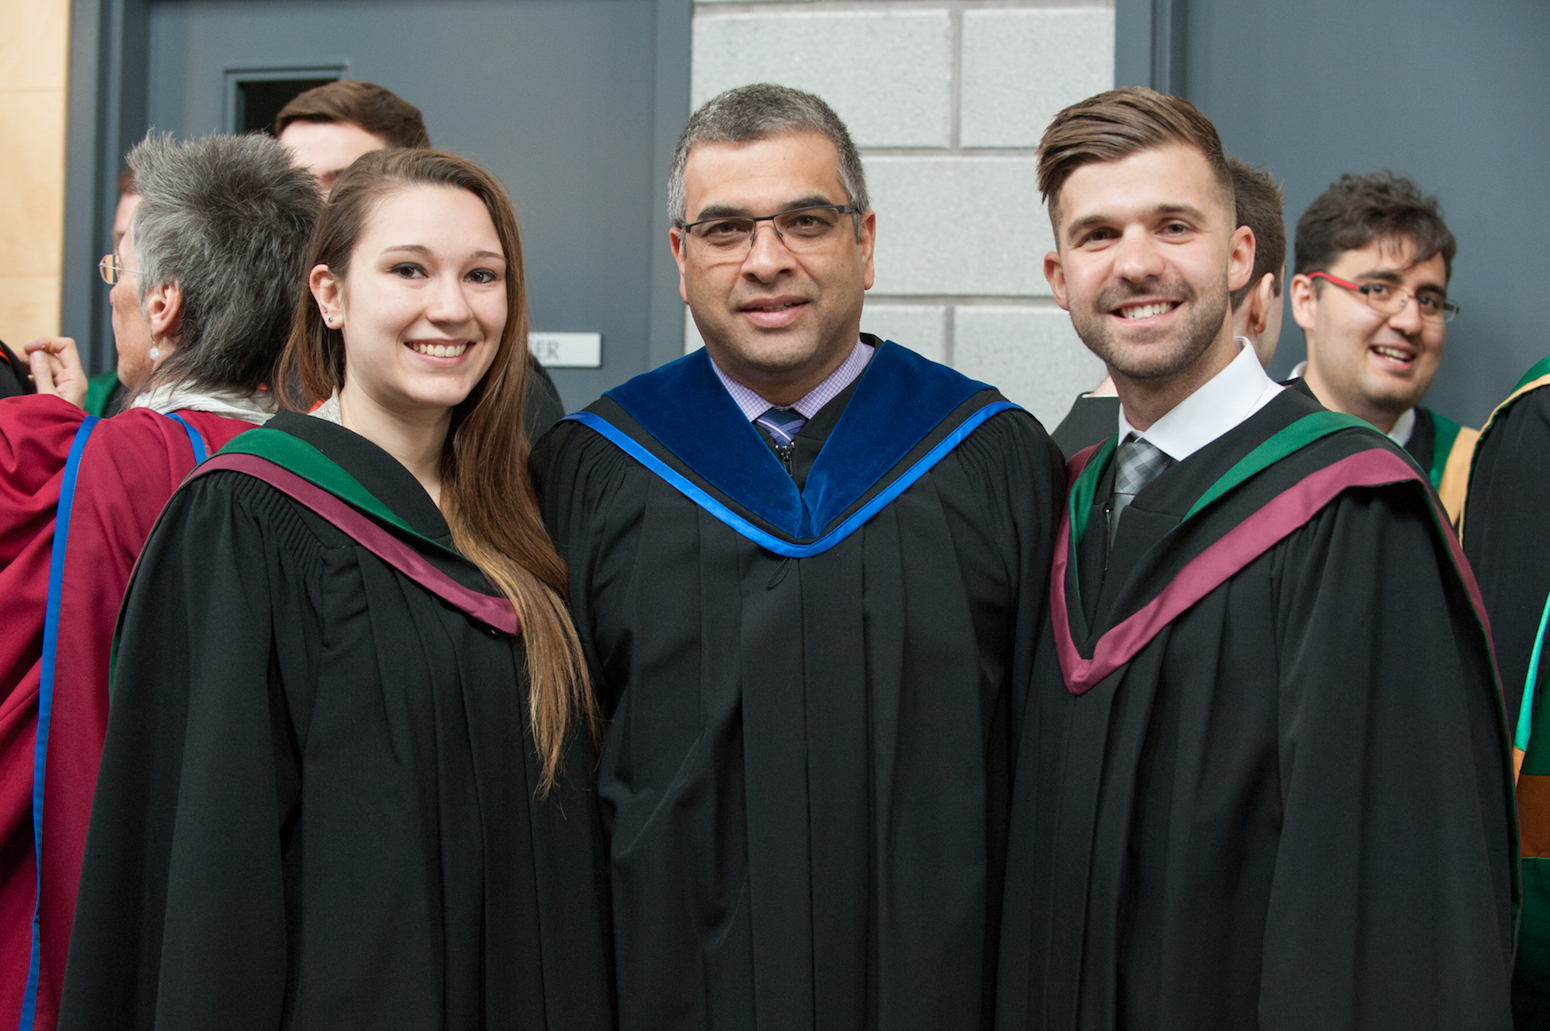 BSc in Paramedicine graduates Damia Scott, left, and Mike Hannah, right, are pictured with Dr. Trevor Jain, program director.